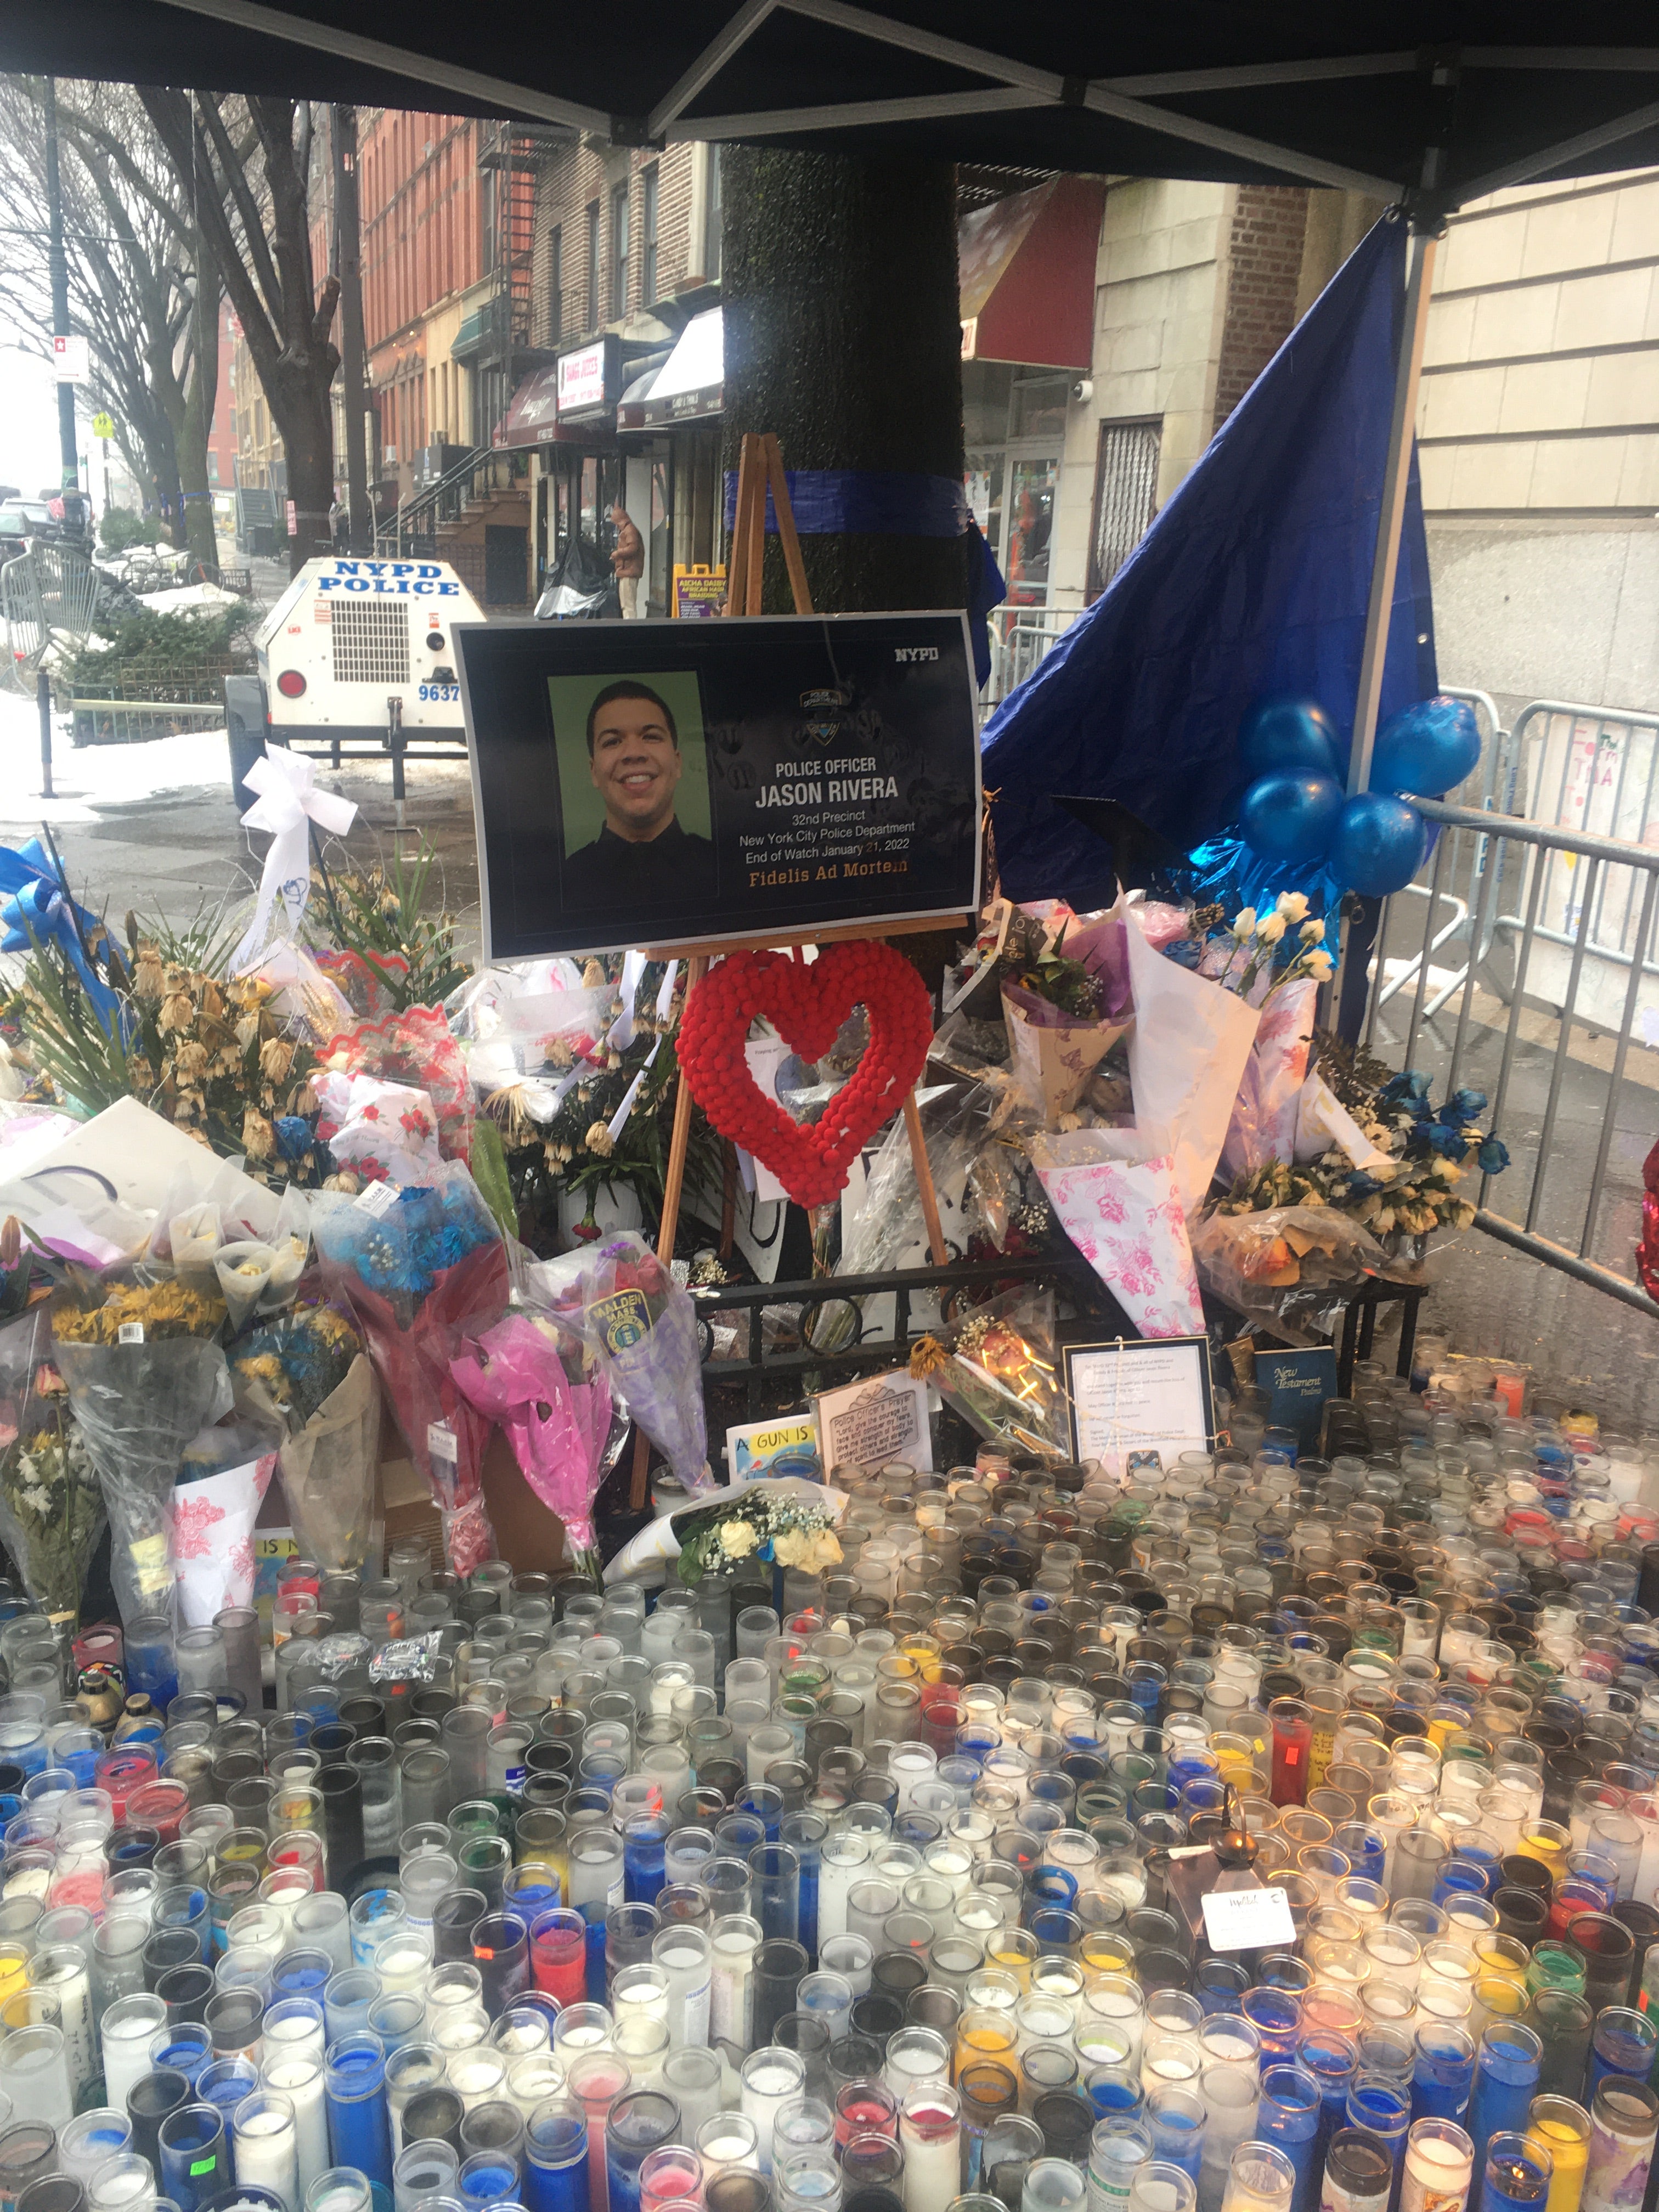 A tribute to NYPD officer Jason Rivera outside the 135th St police precinct in Harlem